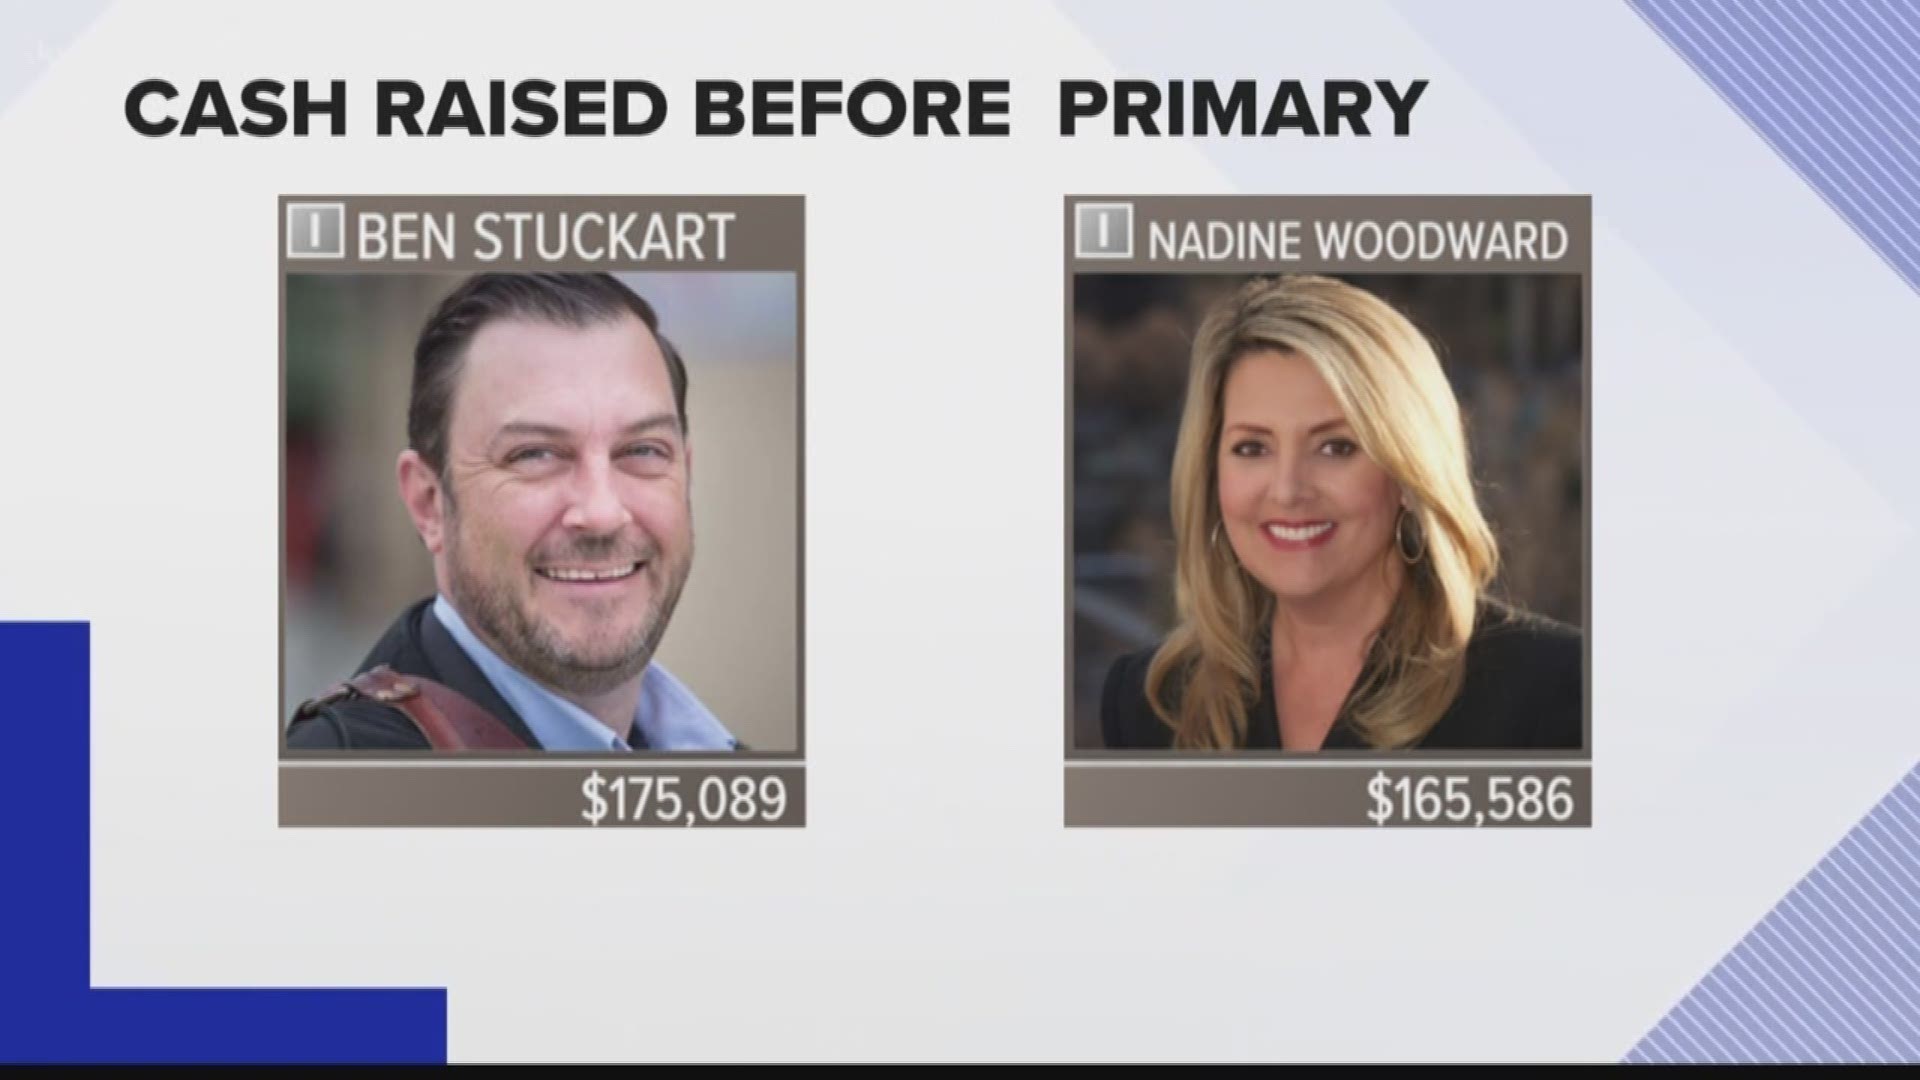 Since the Aug. 6 primary, mayoral candidates Ben Stuckart and Nadine Woodward have raised nearly $100,000 in cash donations alone.